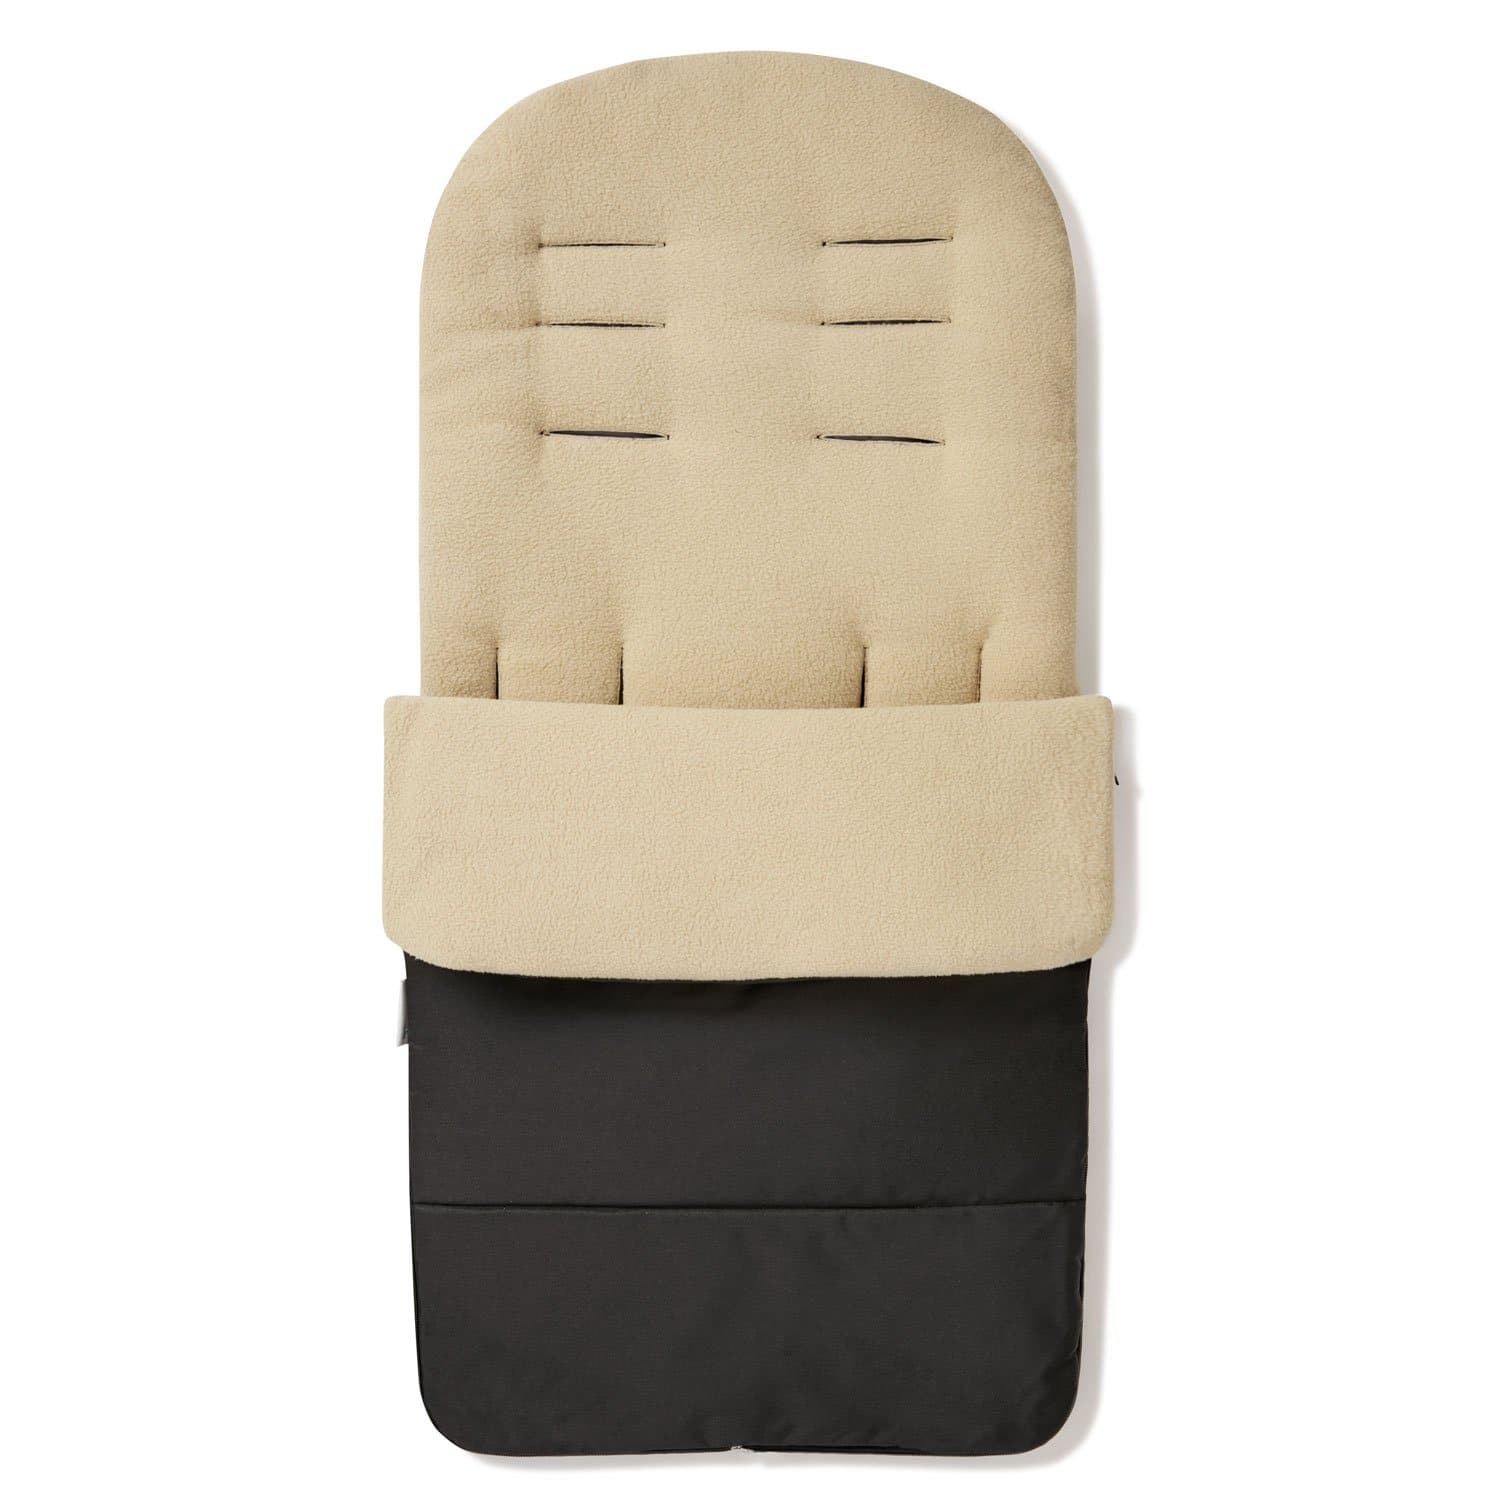 Premium Footmuff / Cosy Toes Compatible with Zeta - Desert Sand / Fits All Models | For Your Little One